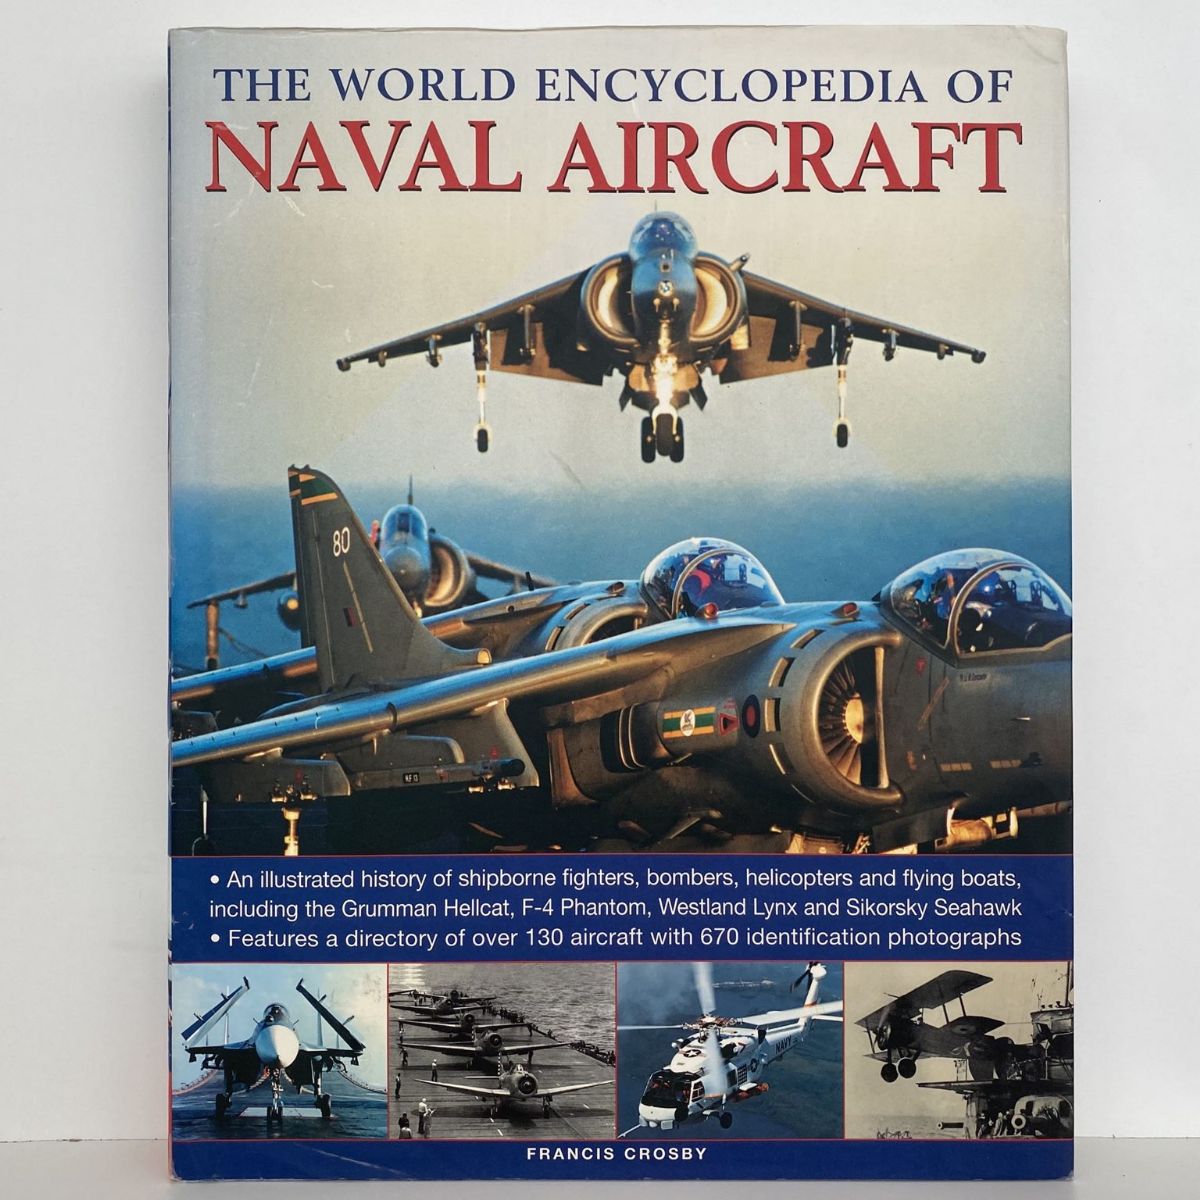 THE WORLD ENCYCLOPEADIA OF NAVAL AIRCRAFT